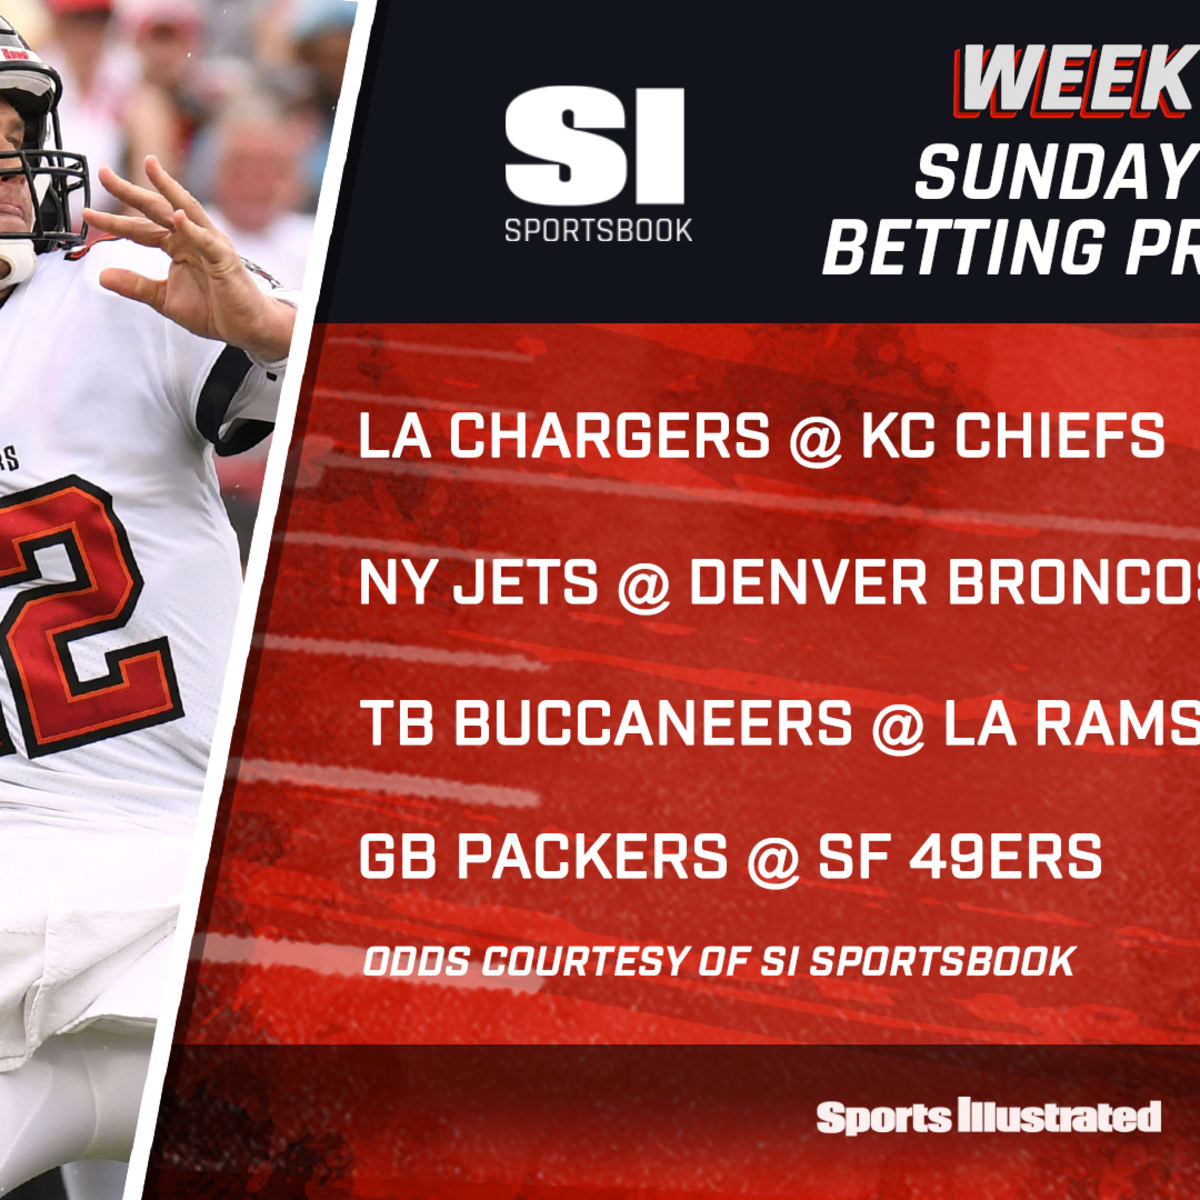 Nfl Betting Against The Spread Week 3